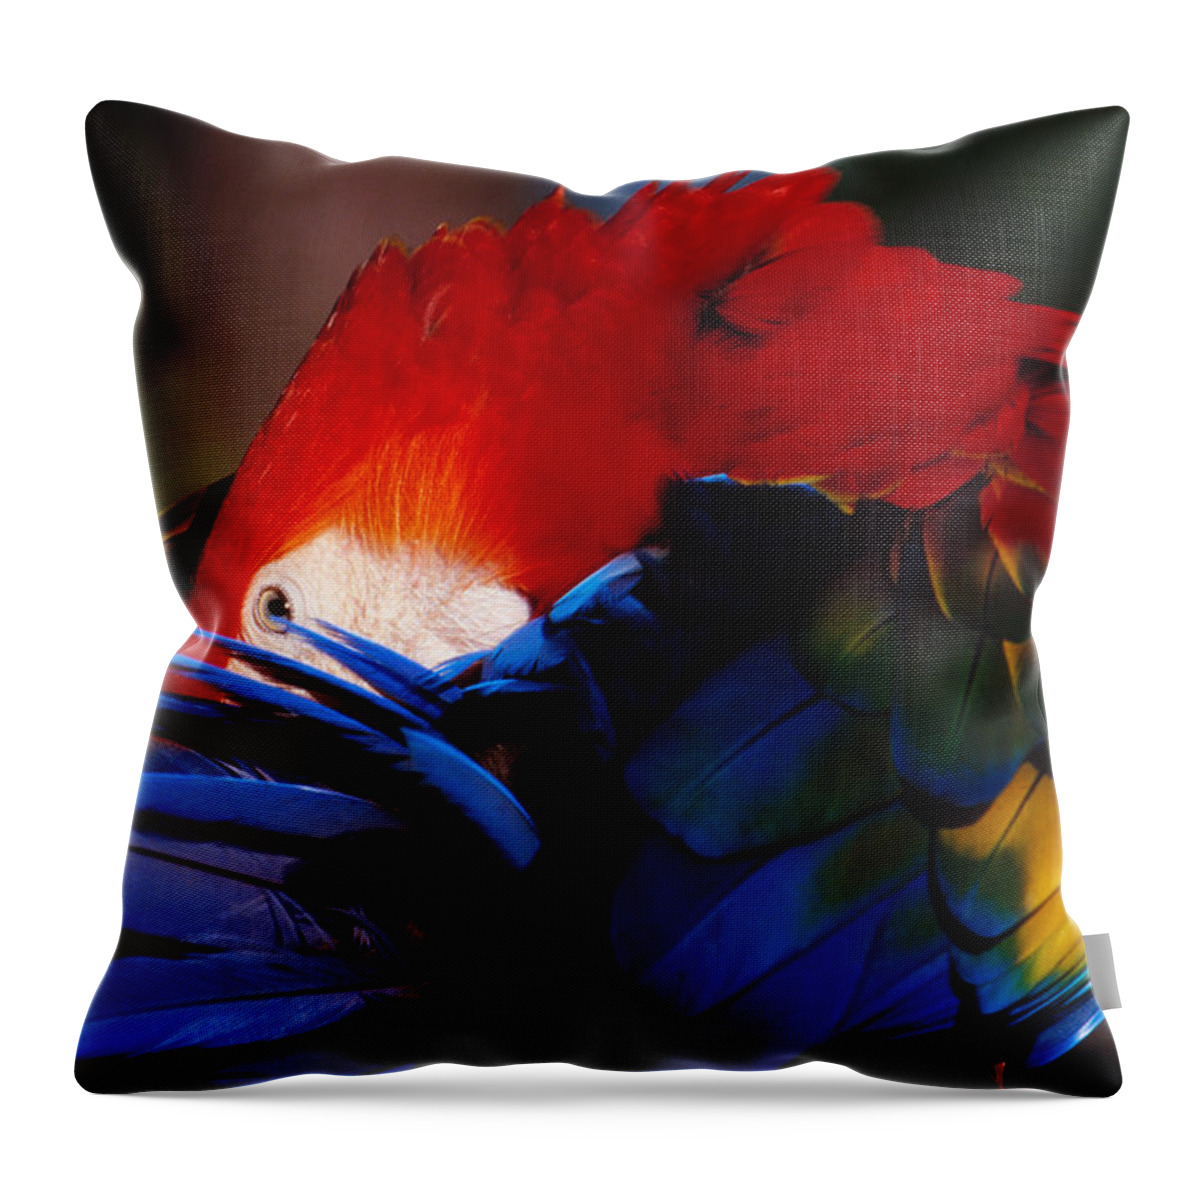 Scarlet Throw Pillow featuring the photograph Scarlet Macaw by Bradford Martin